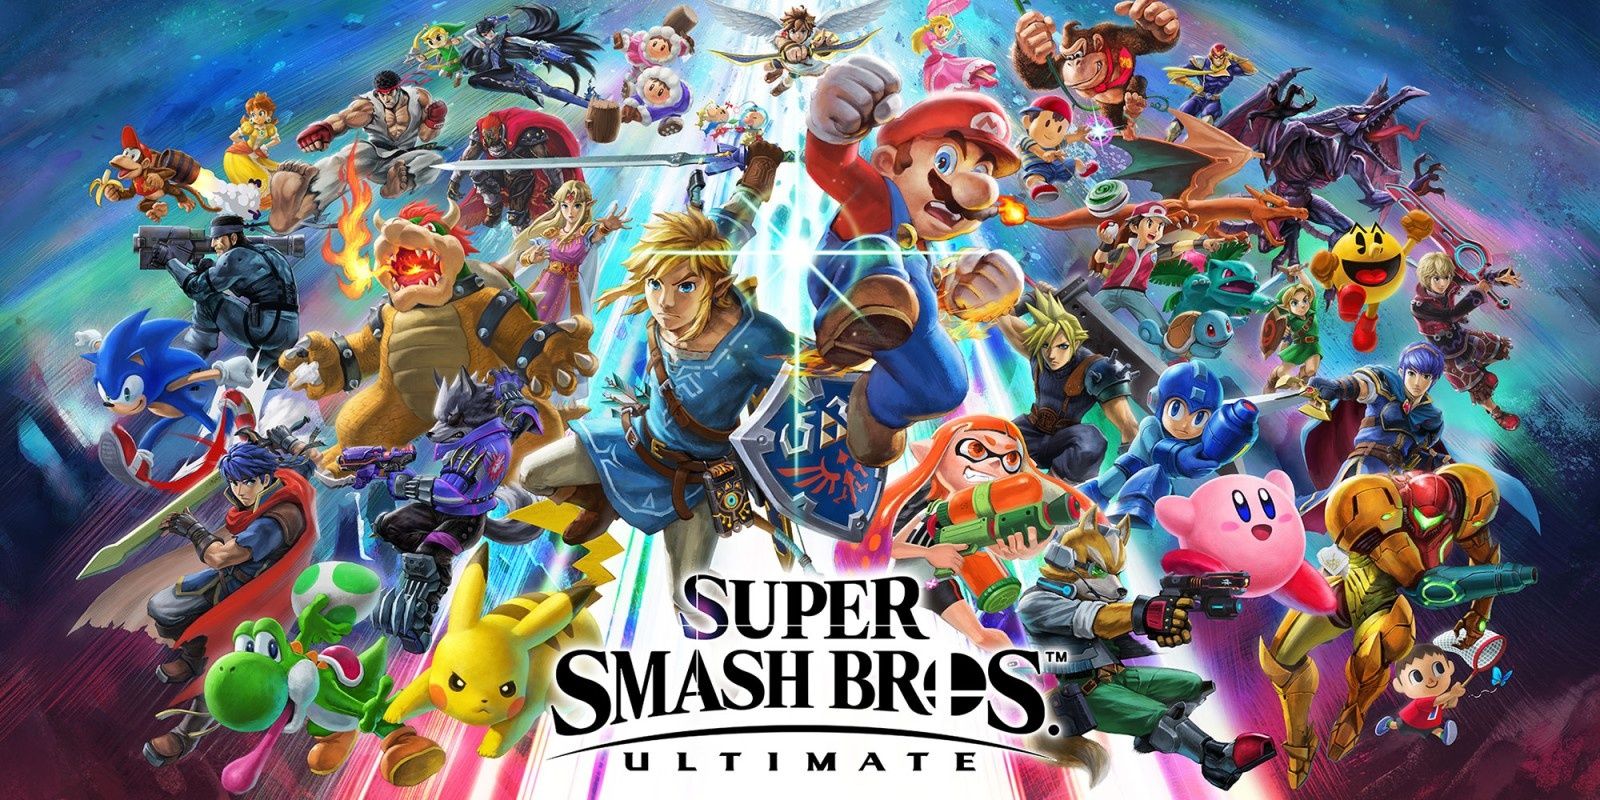 All of the characters in Super Smash Bros. Ultimate